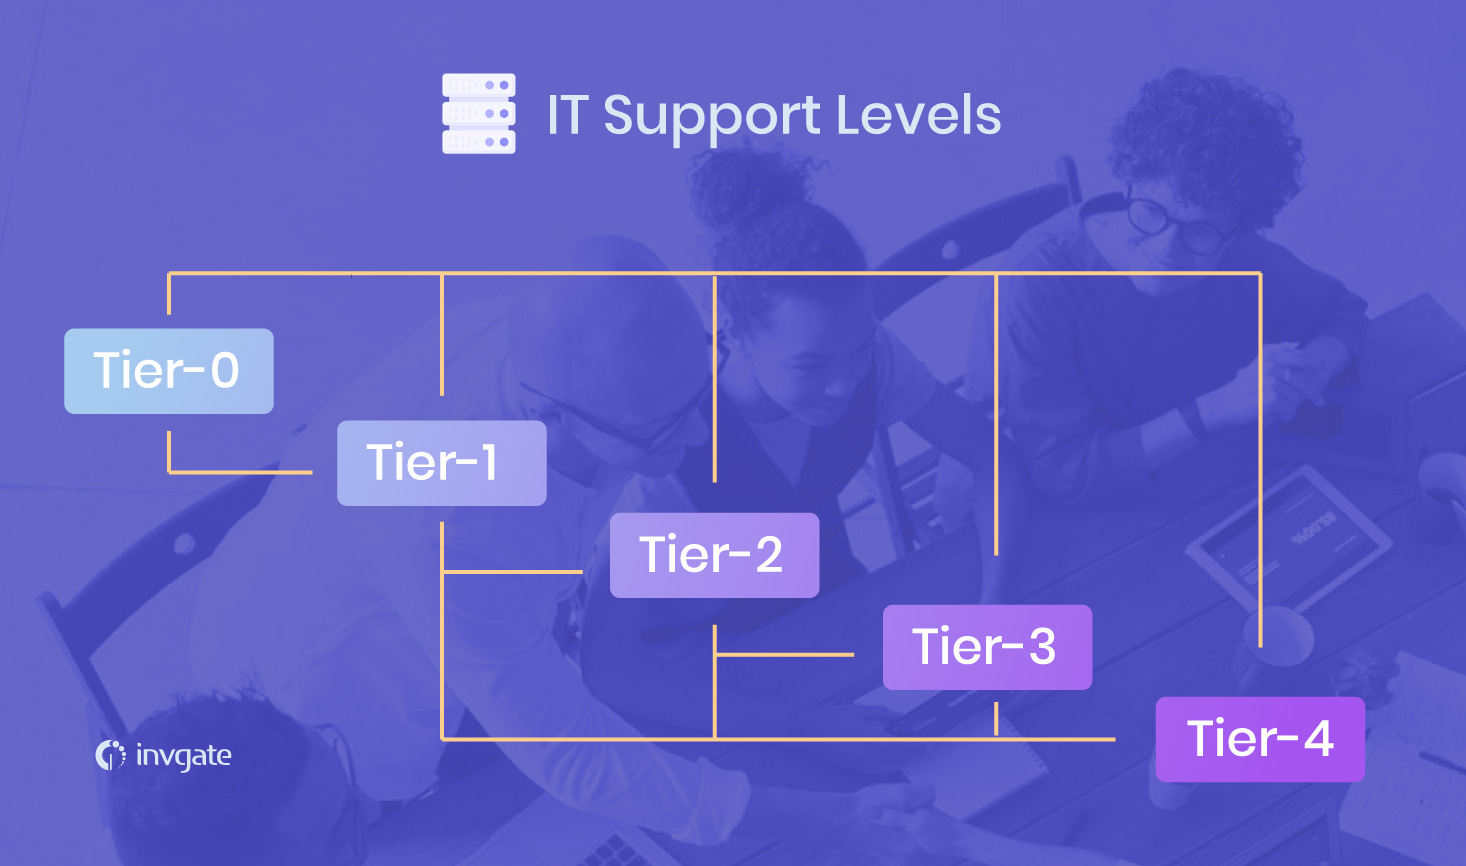 IT support tiers/levels